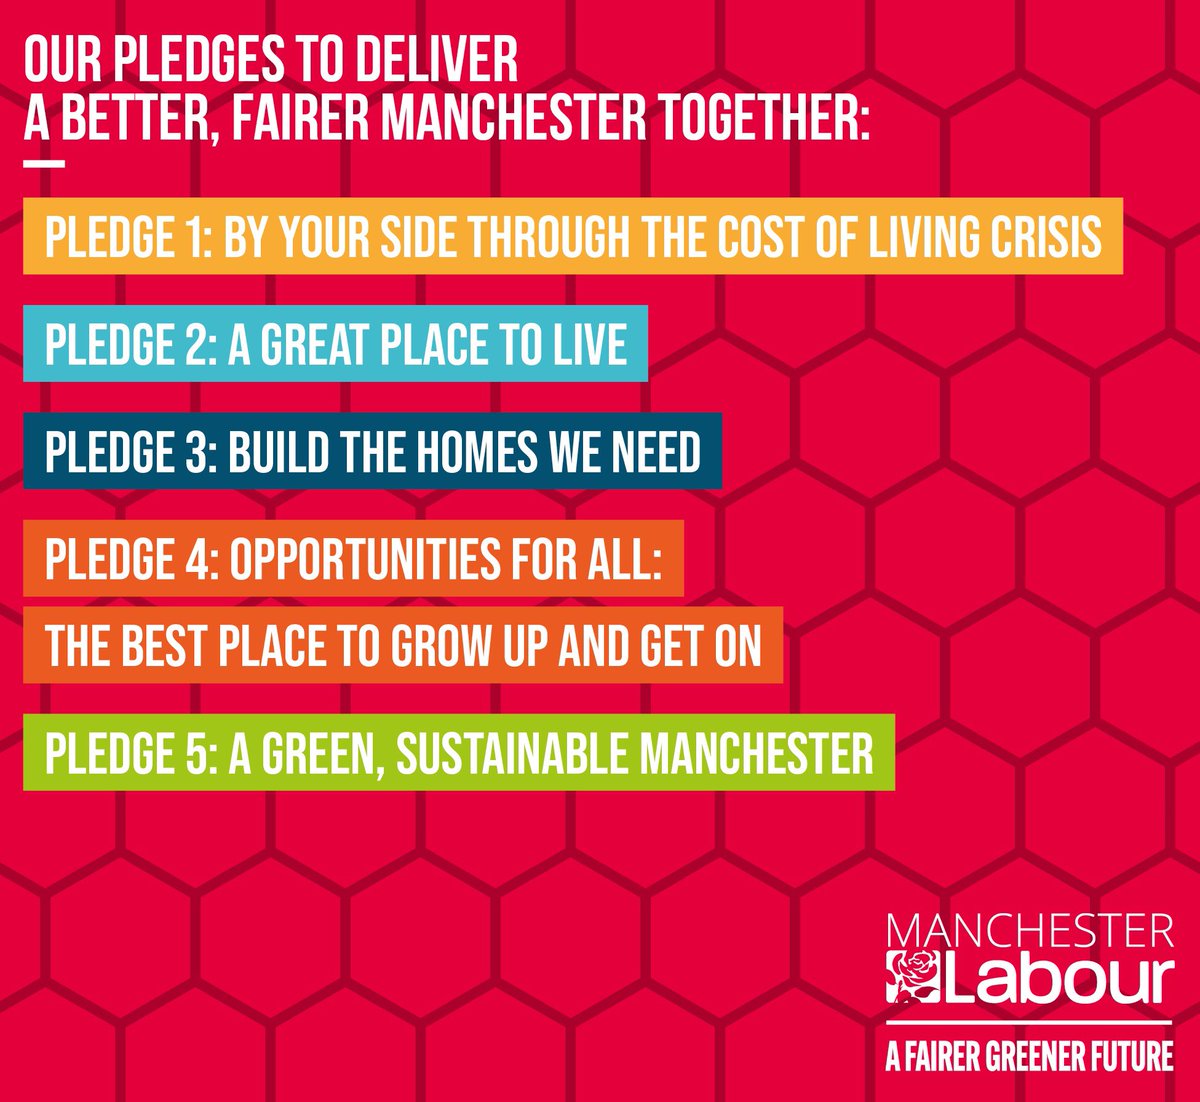 McrLabour tweet picture